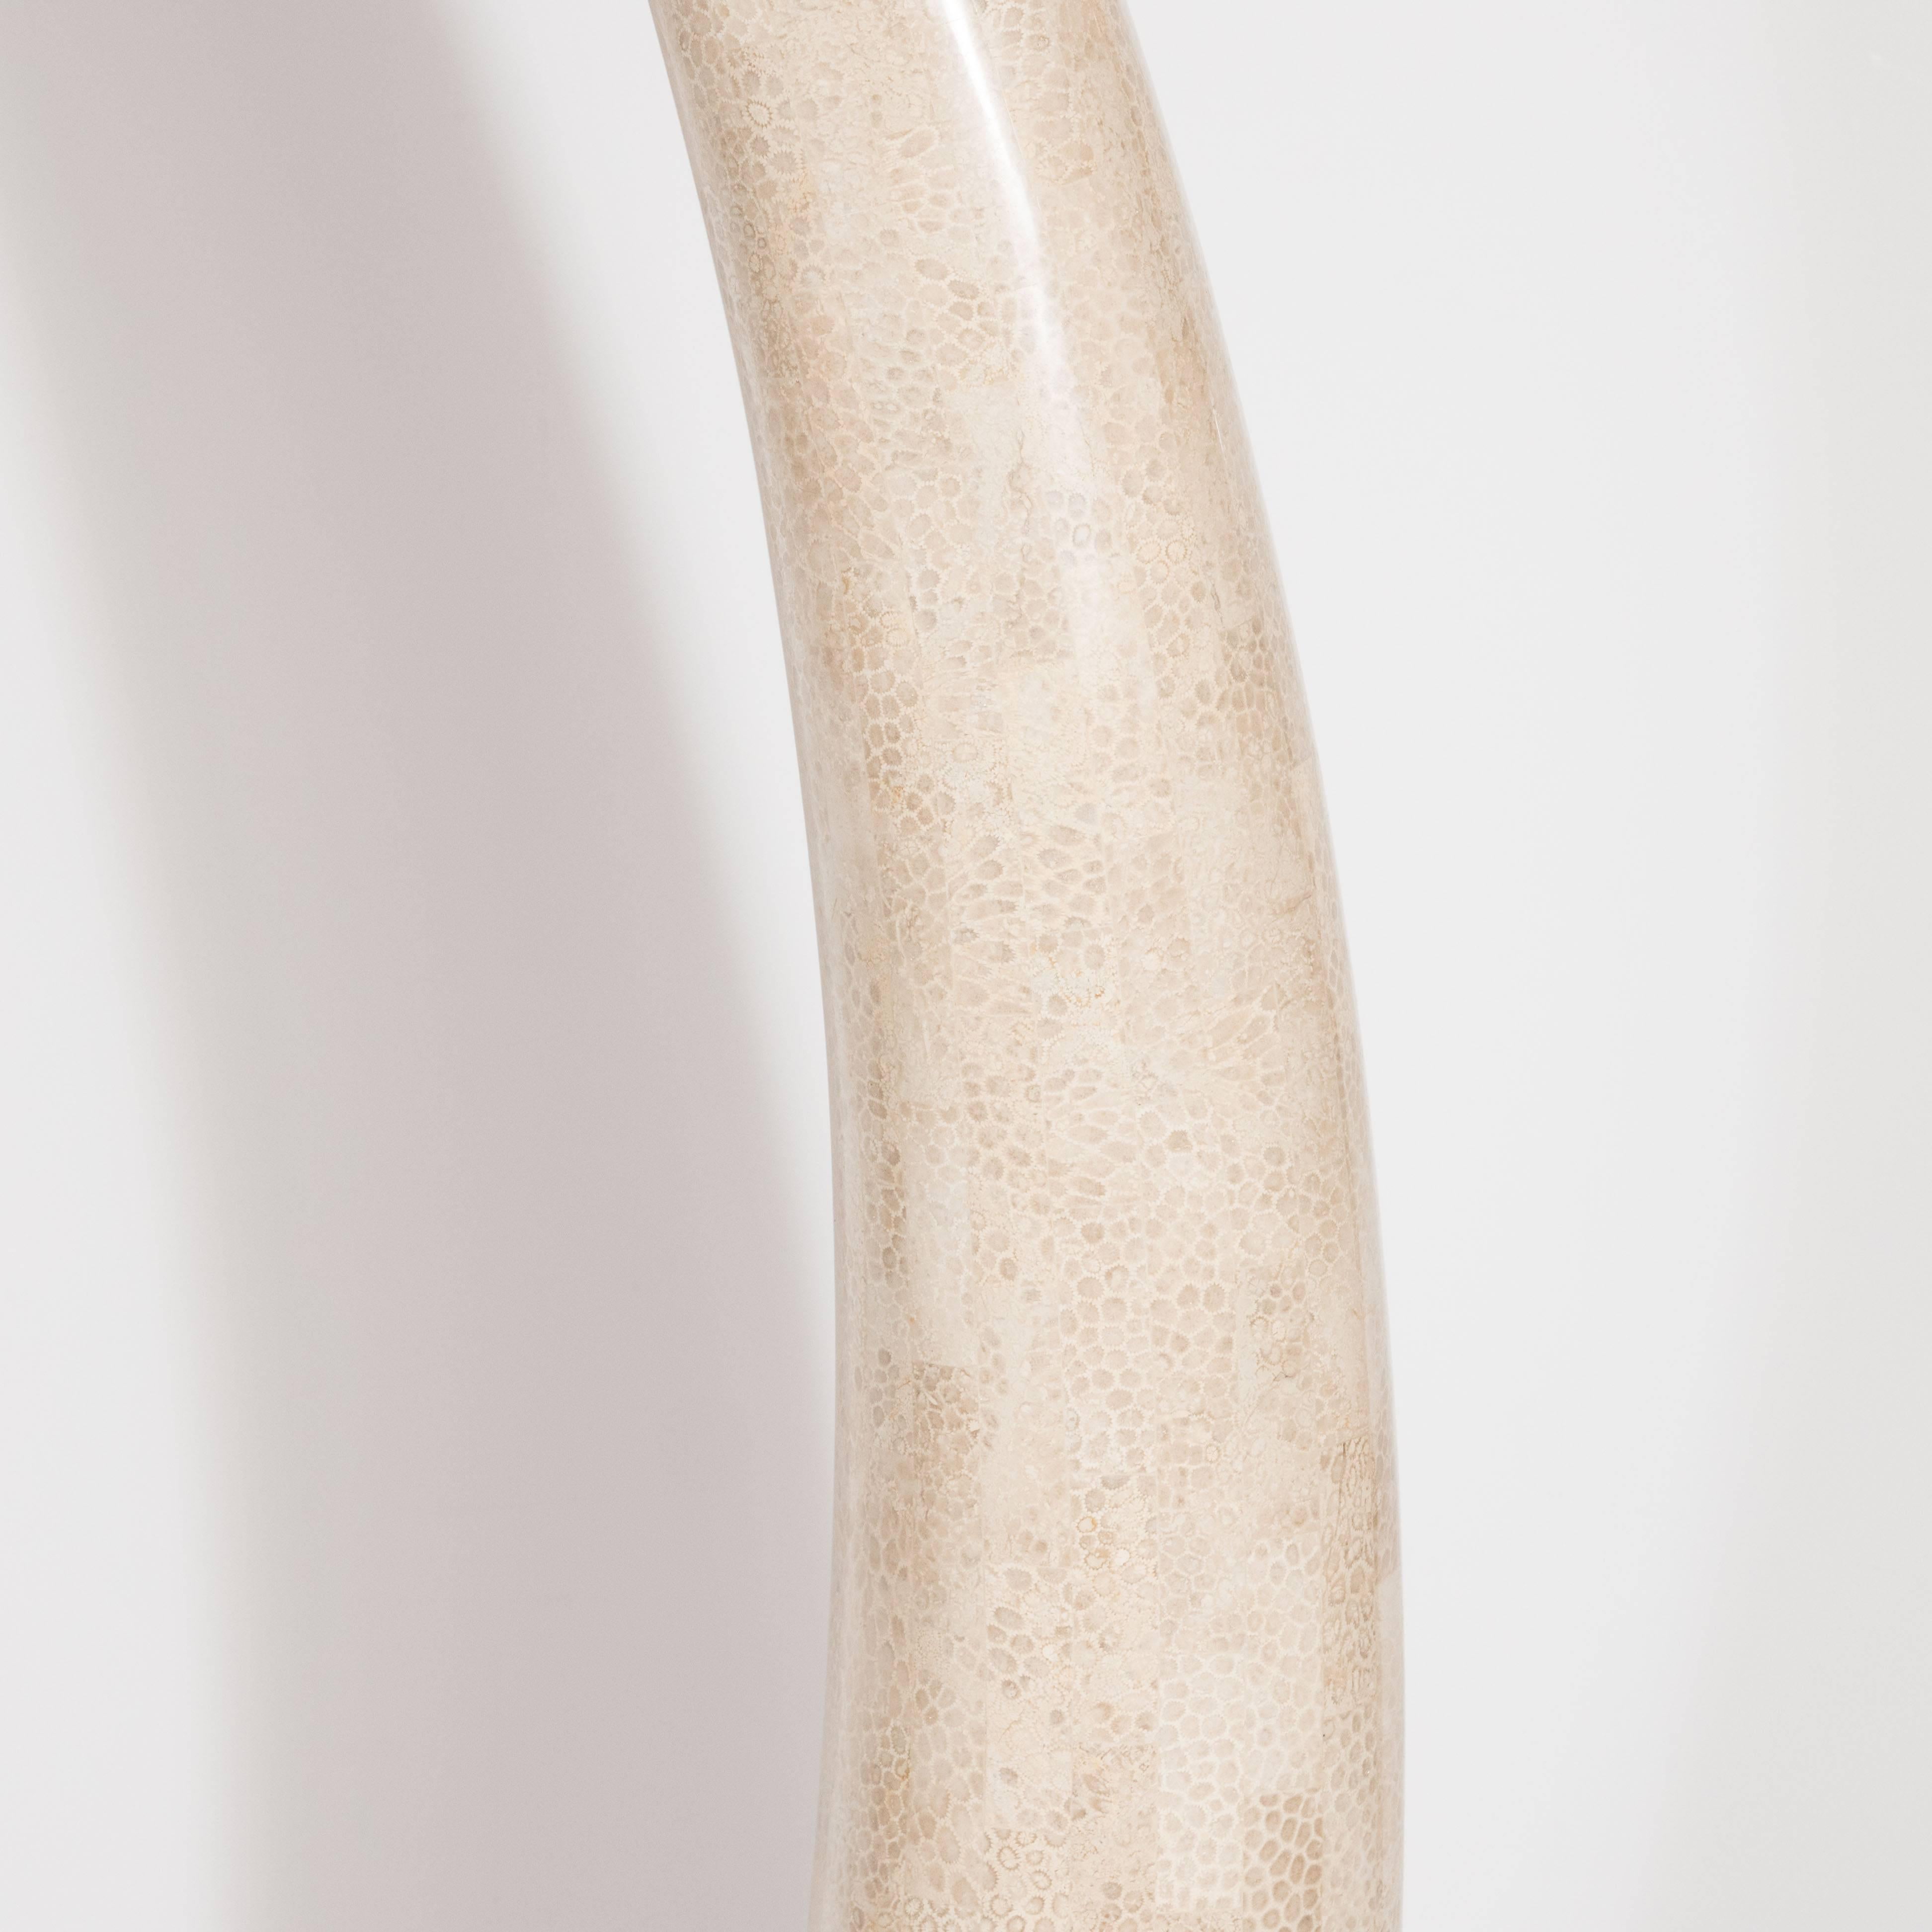 American Mid-Century Modern Tessellated Stone Tusk with Brass Detailing by Maitland-Smith